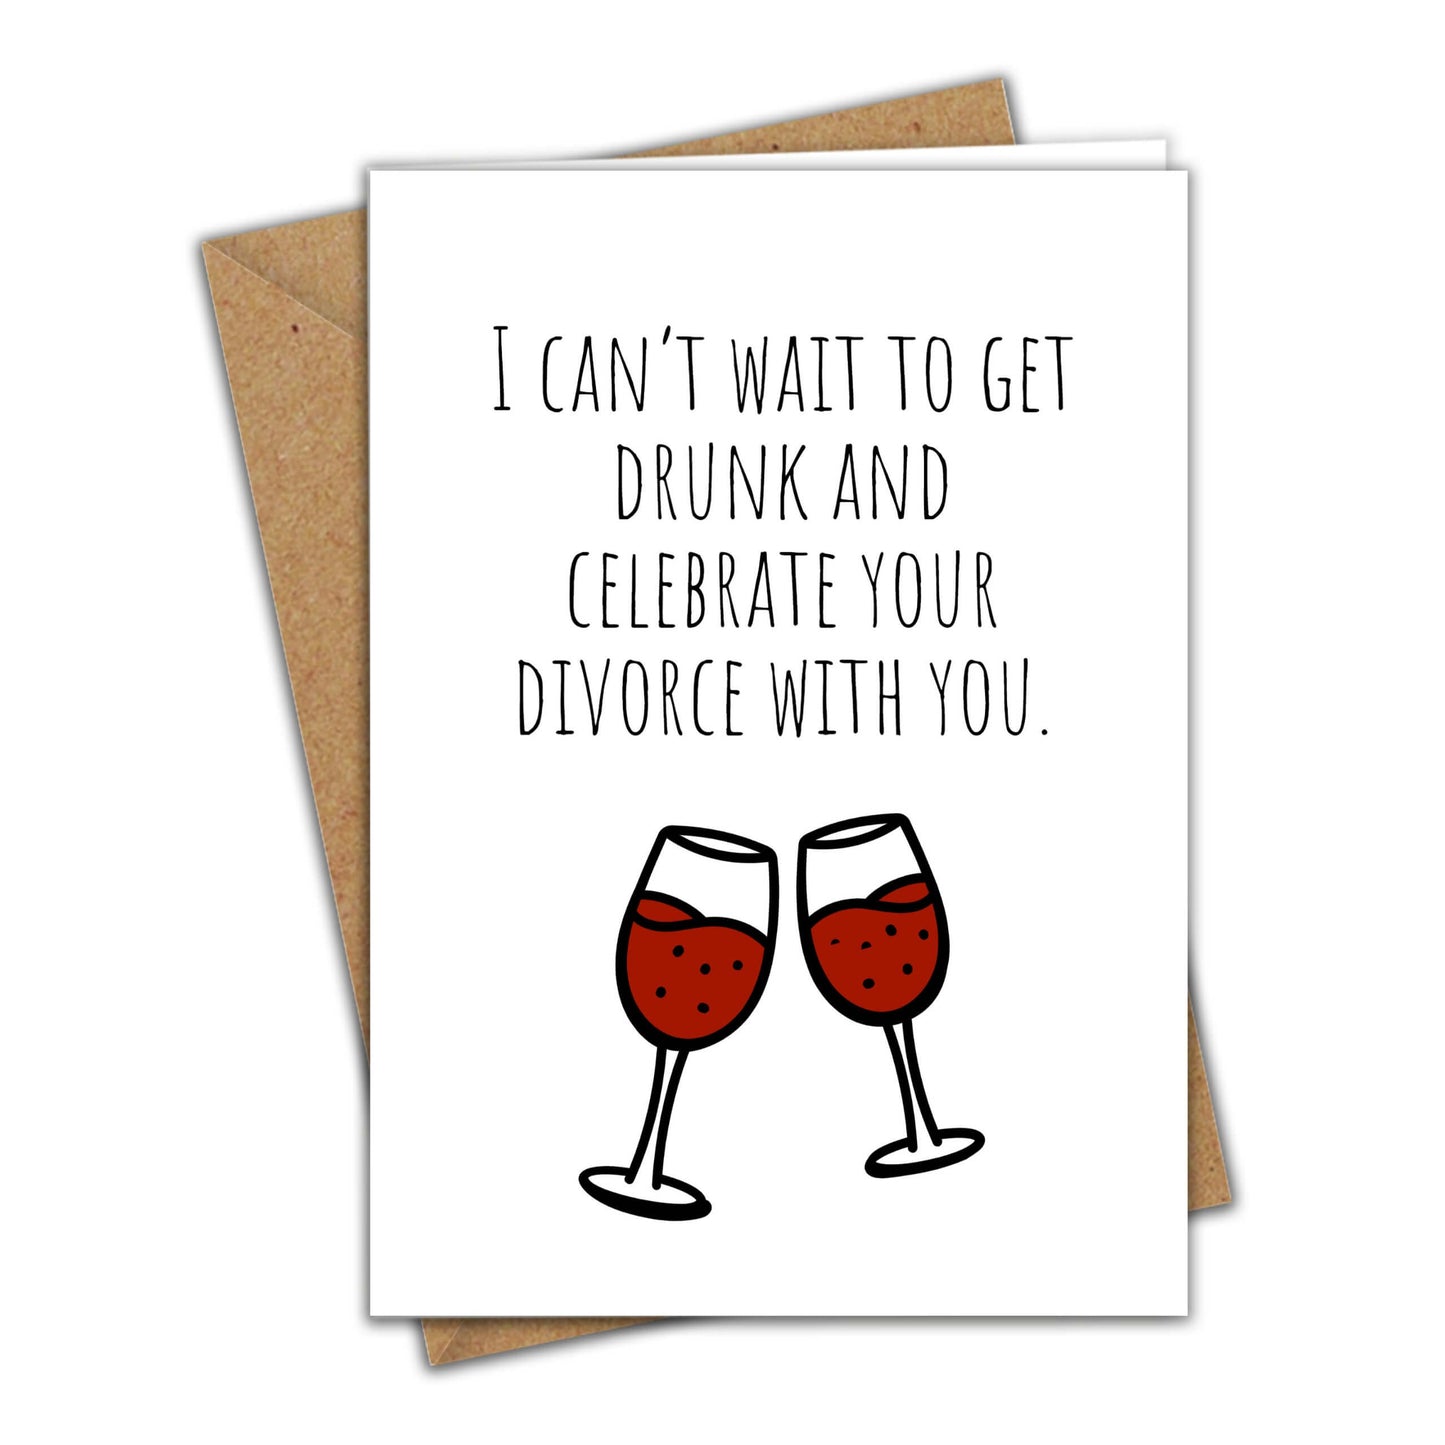 Little Kraken's I Can't Wait to Get Drunk And Celebrate Your Divorce With You | Funny Divorce Card | Congratulations on Your Divorce Greeting Card, Divorce Cards for £3.50 each